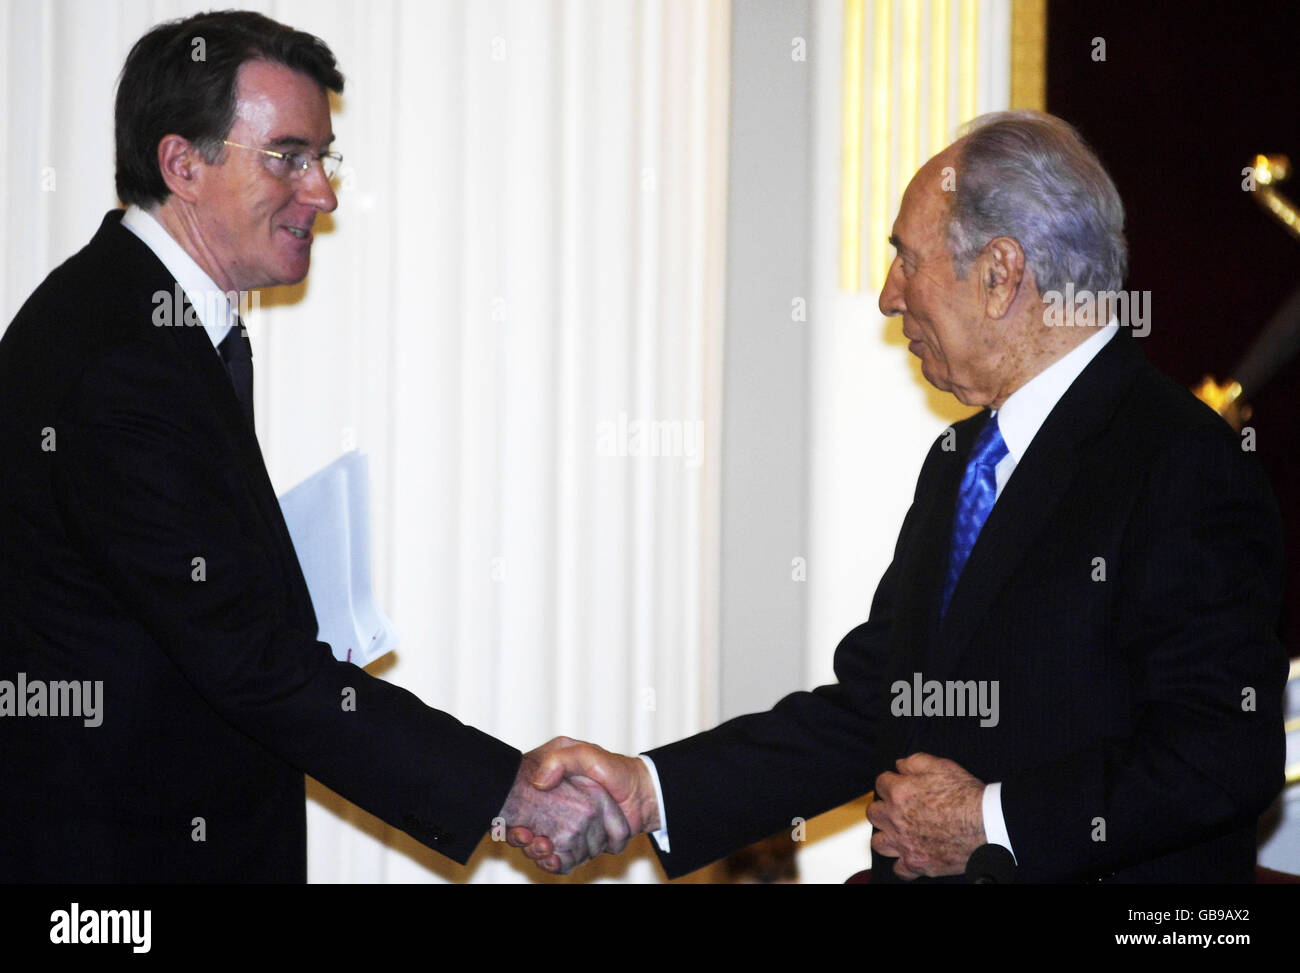 Israeli President Shimon Peres greets Business Secretary Lord Mandelson (left), at Mansion House in London. Stock Photo